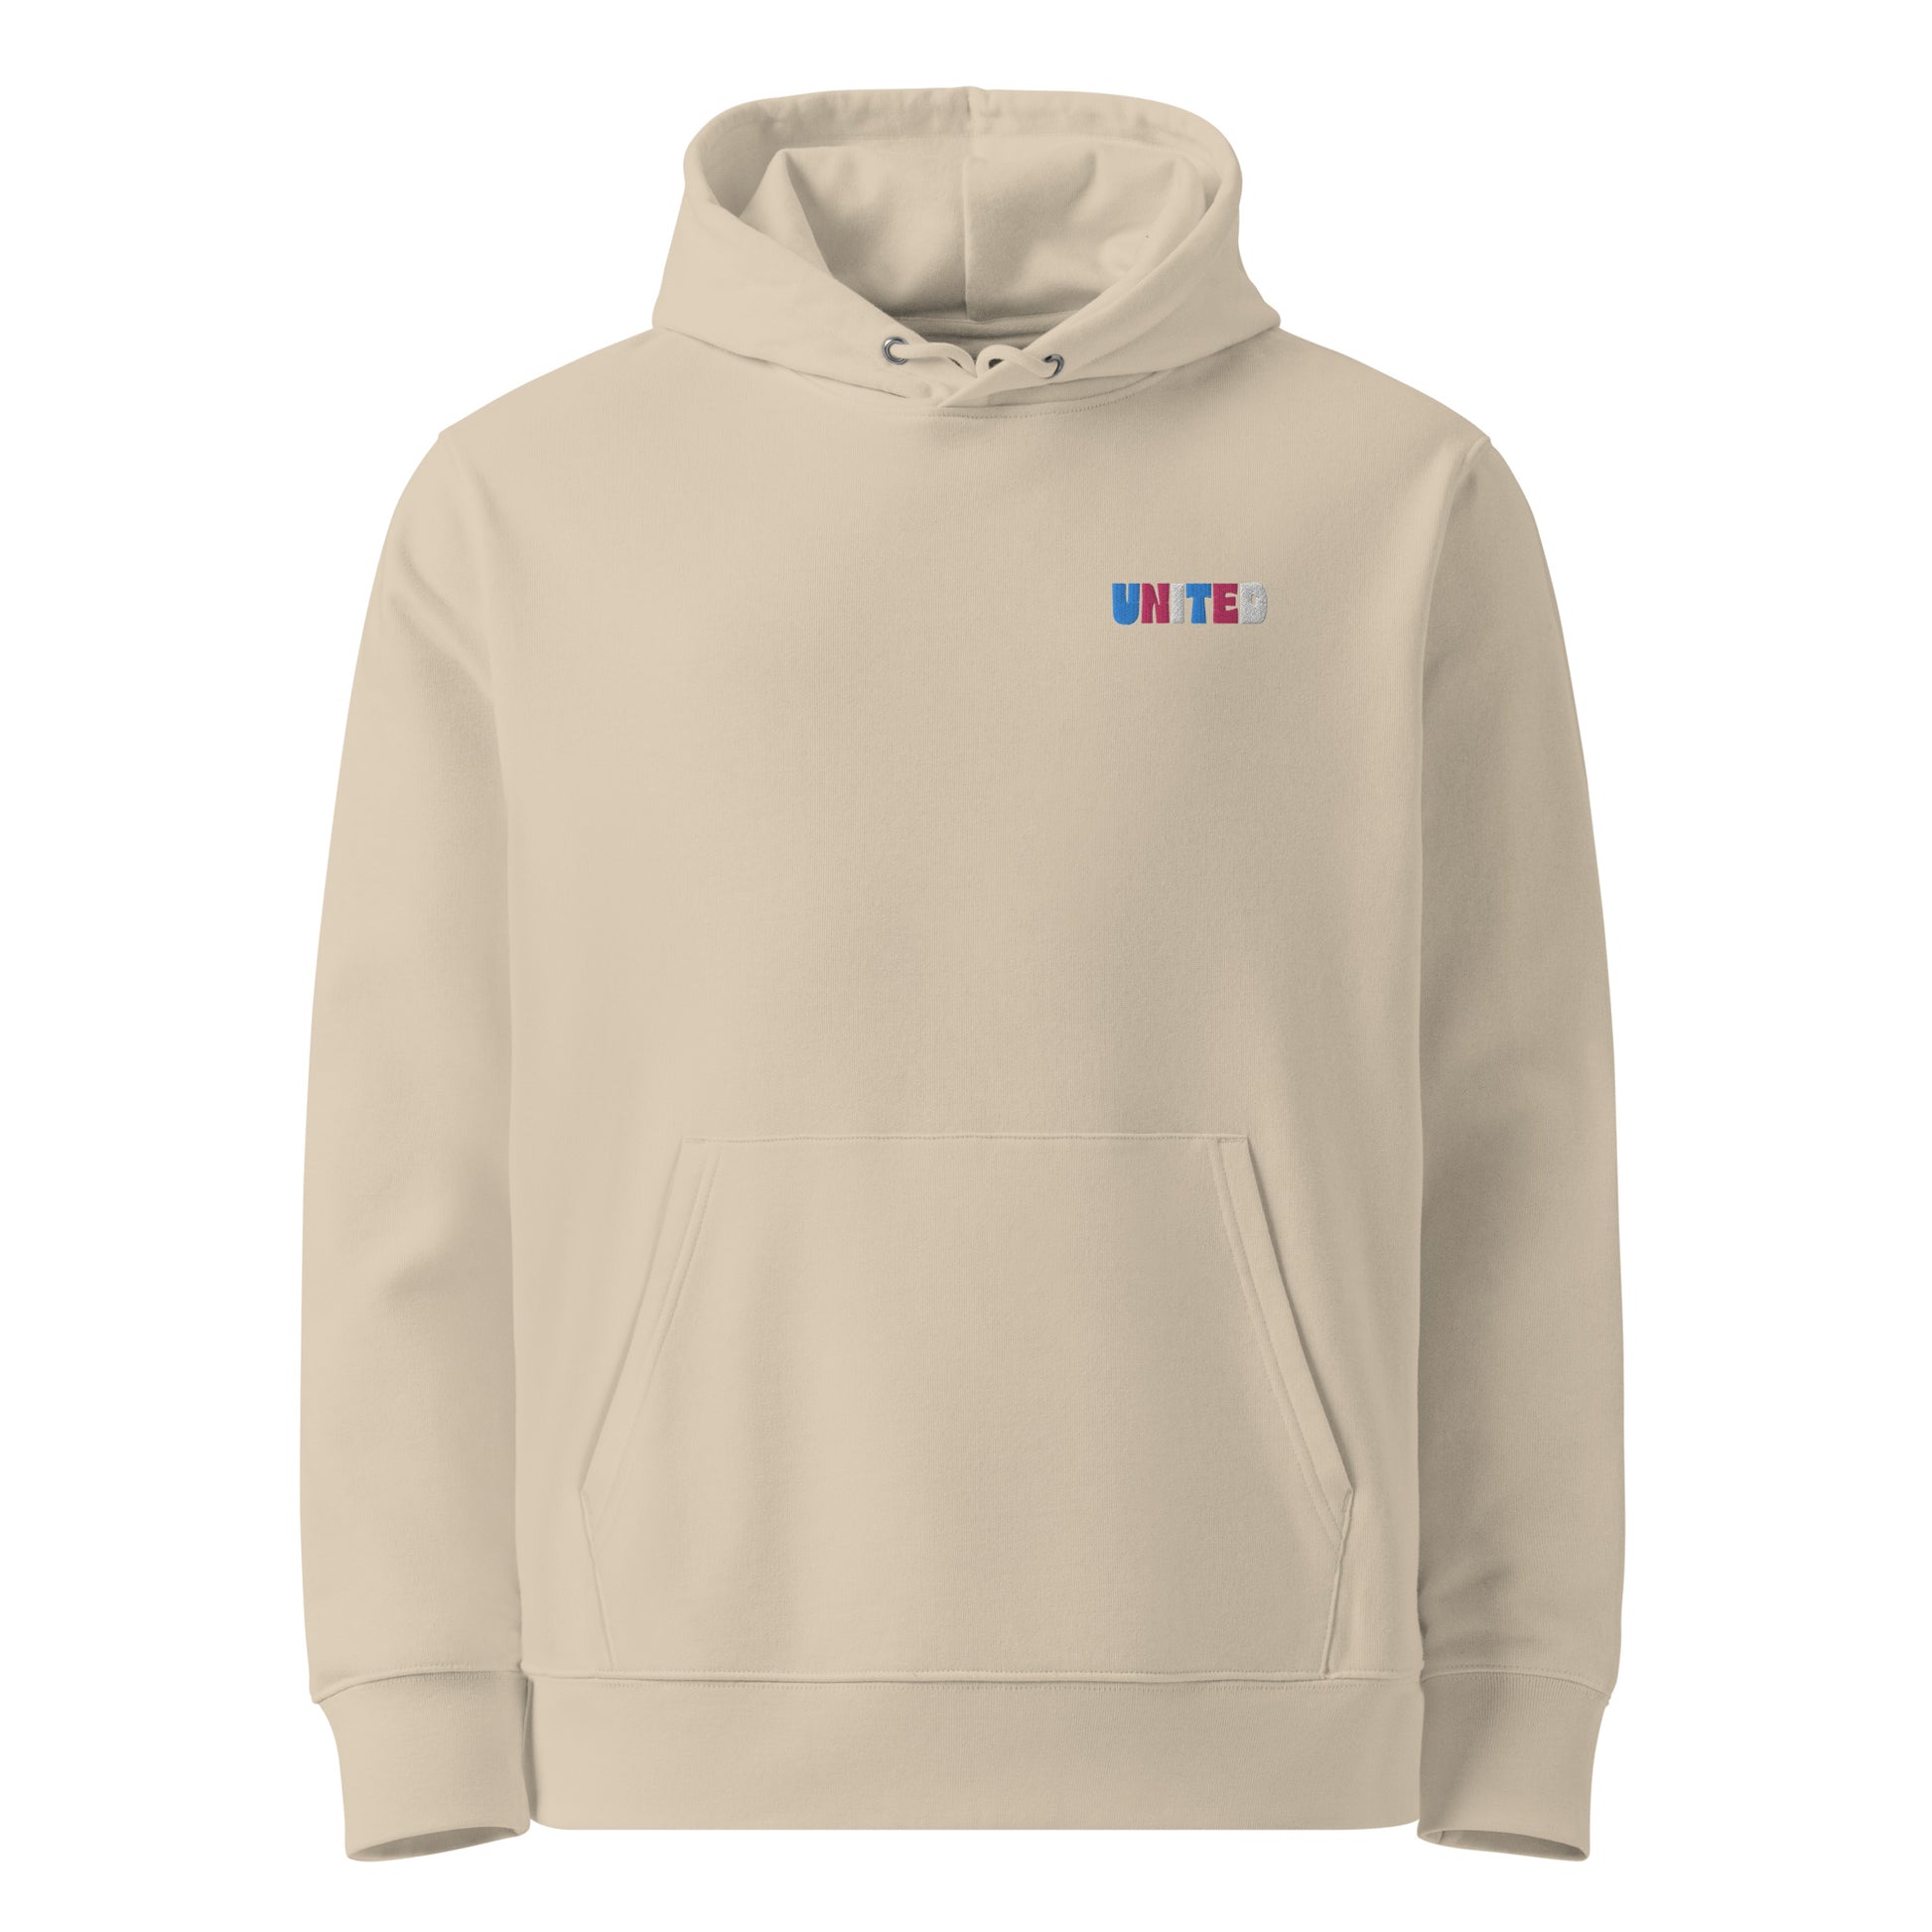 Unisex eco-friendly desert dust hoodie featuring on the upper left chest; united embroidery in transgender pride colors, adding a touch of lgbtq to your outfit. sizes: small, medium, large, extra large, double extra large.